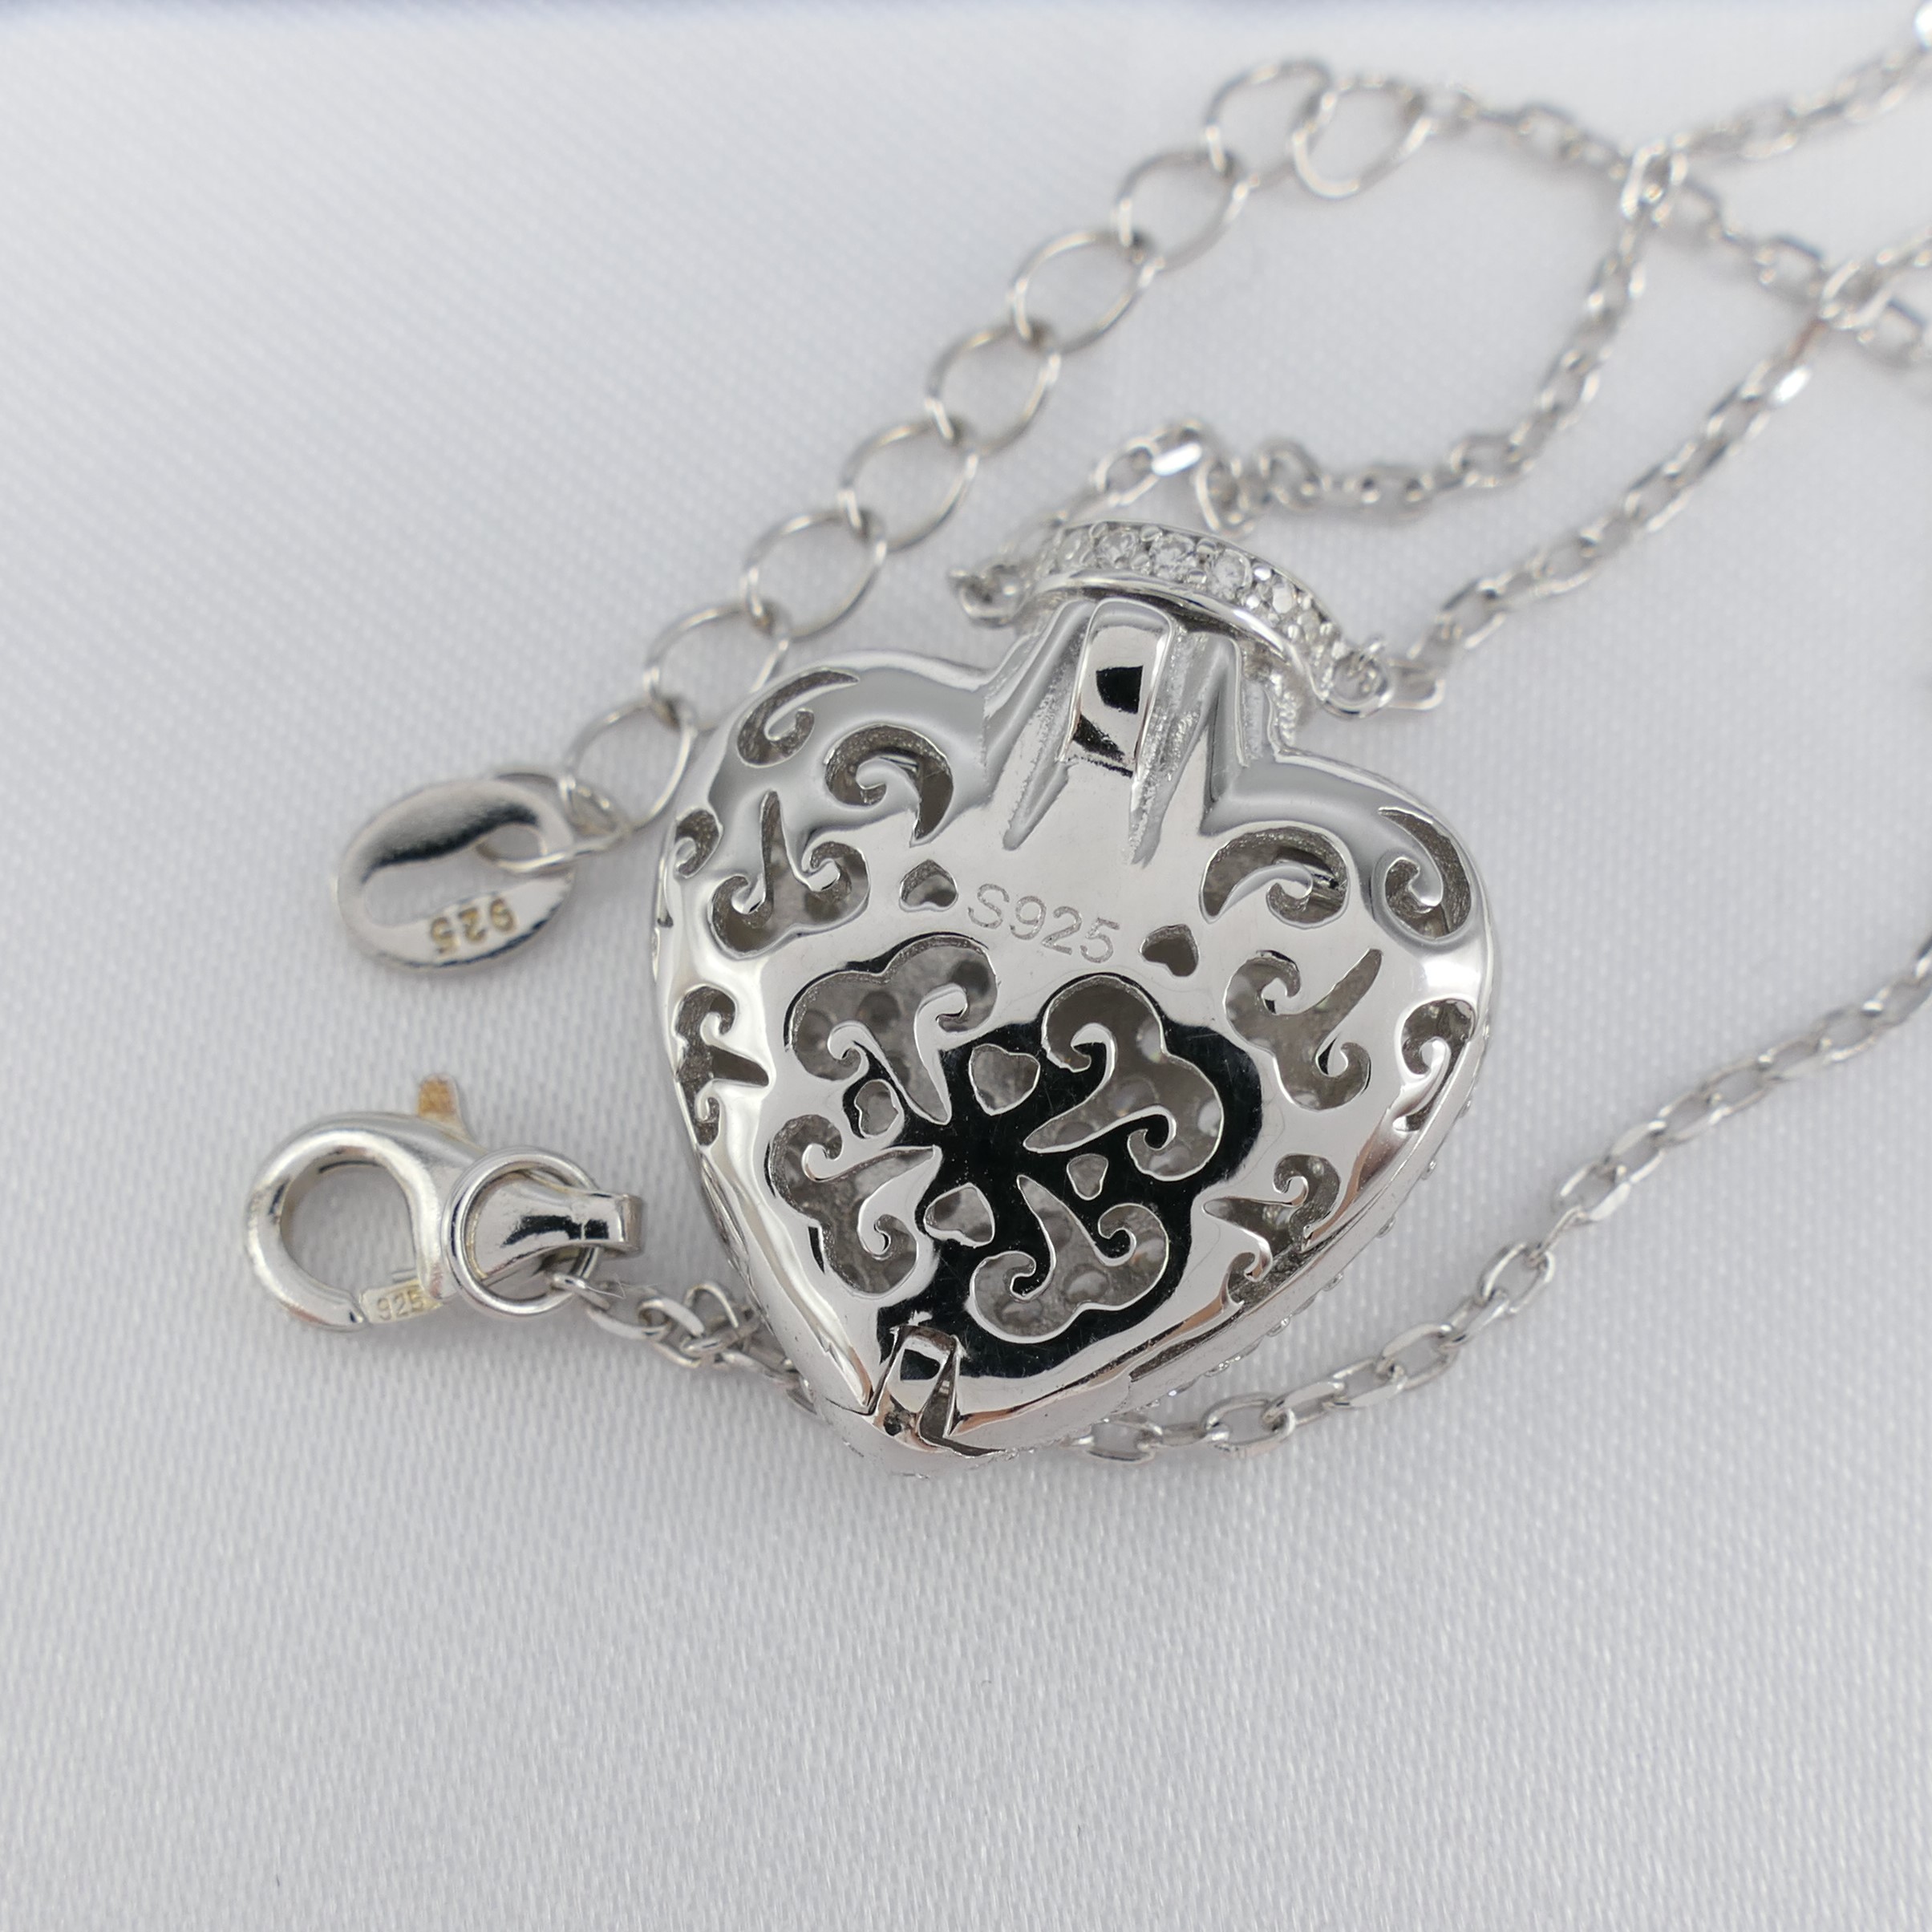 Heart and crown trinket necklace set with multiple stones. - Image 3 of 7